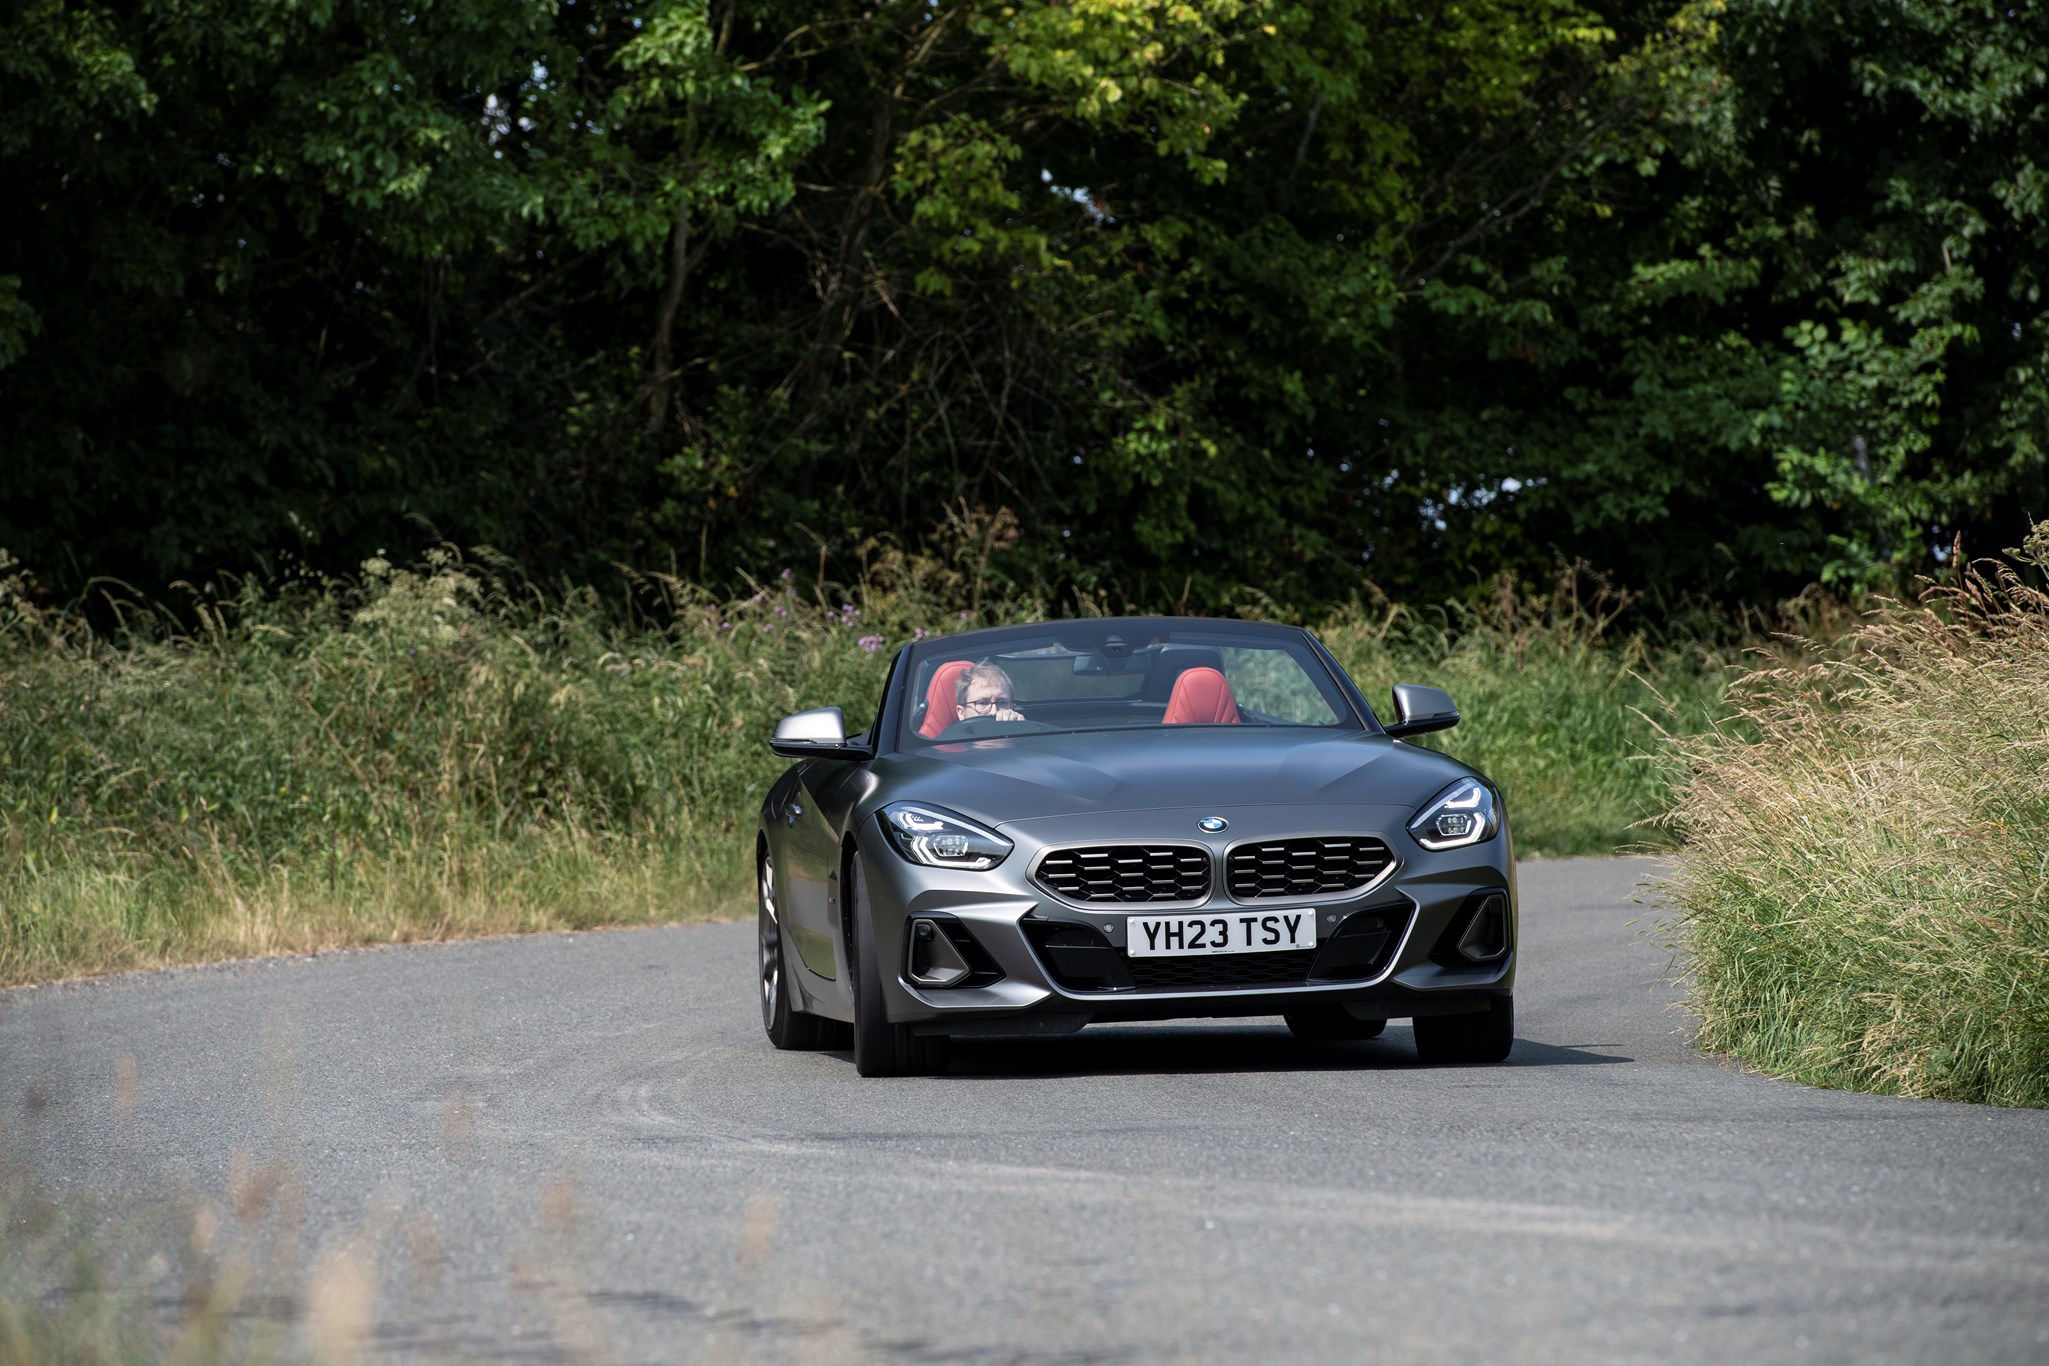 BMW Z4 (2023) review: updated roadster any better?